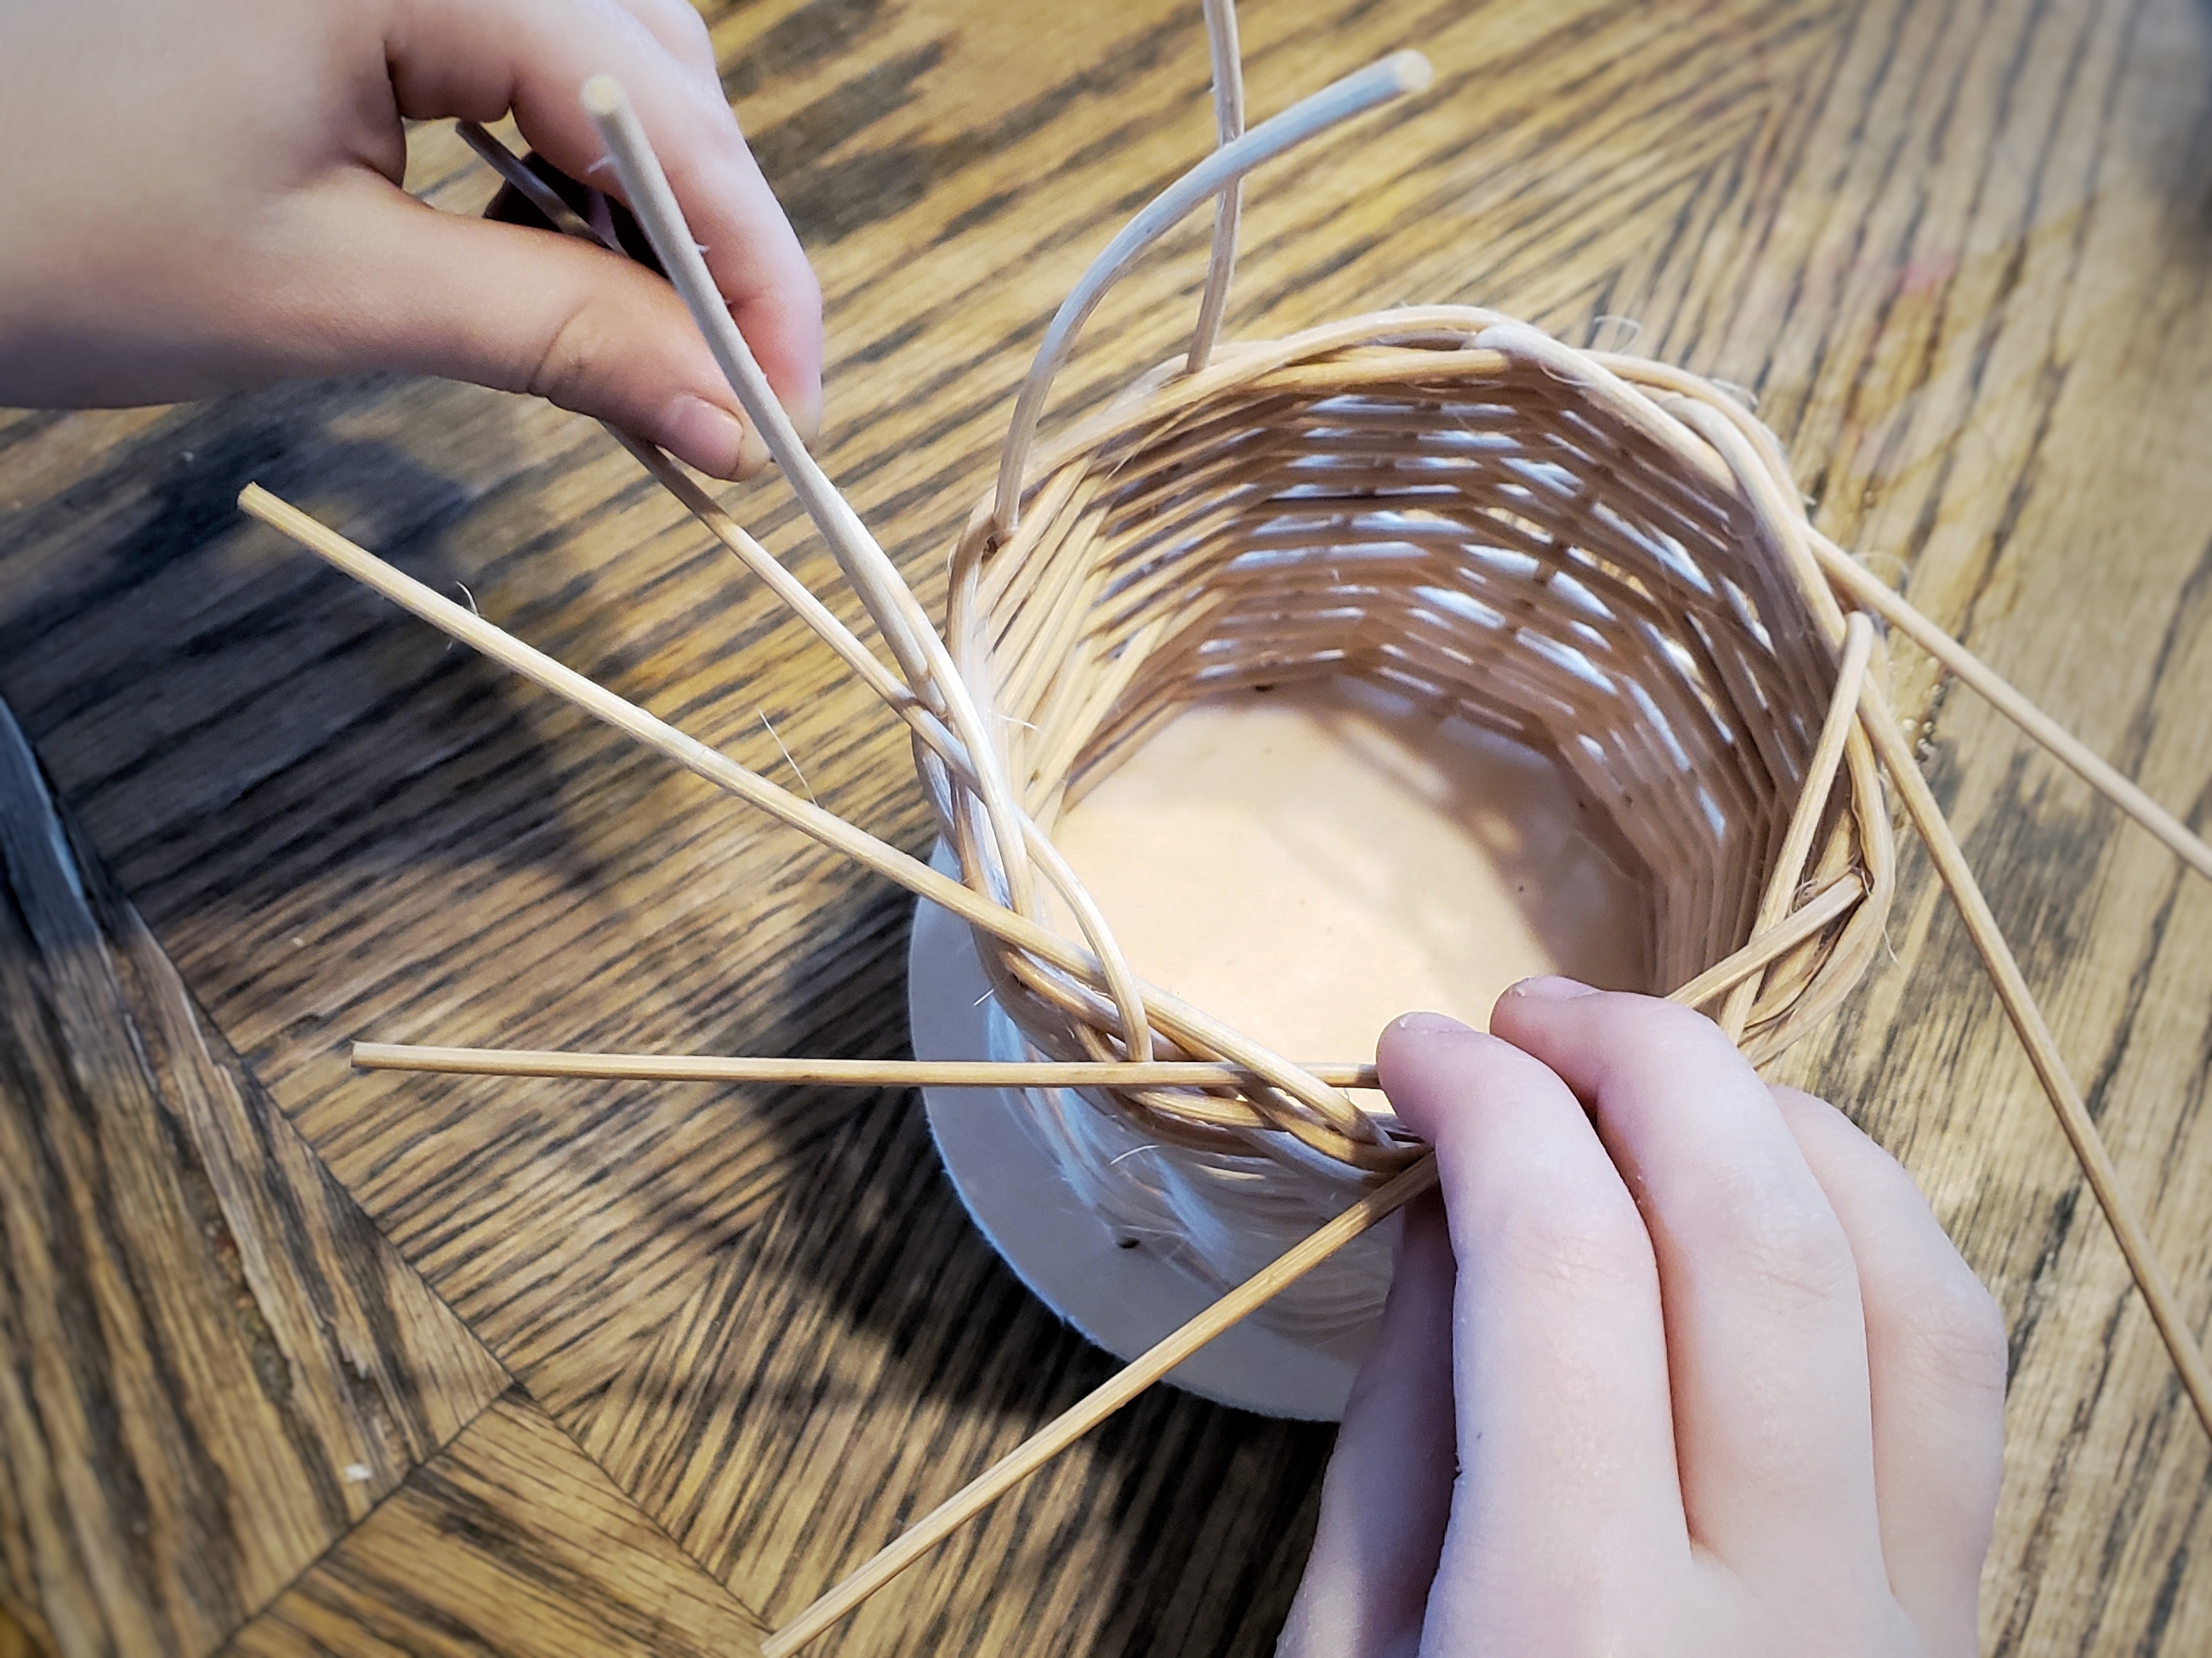 a simple reed basket in the final steps of weaving